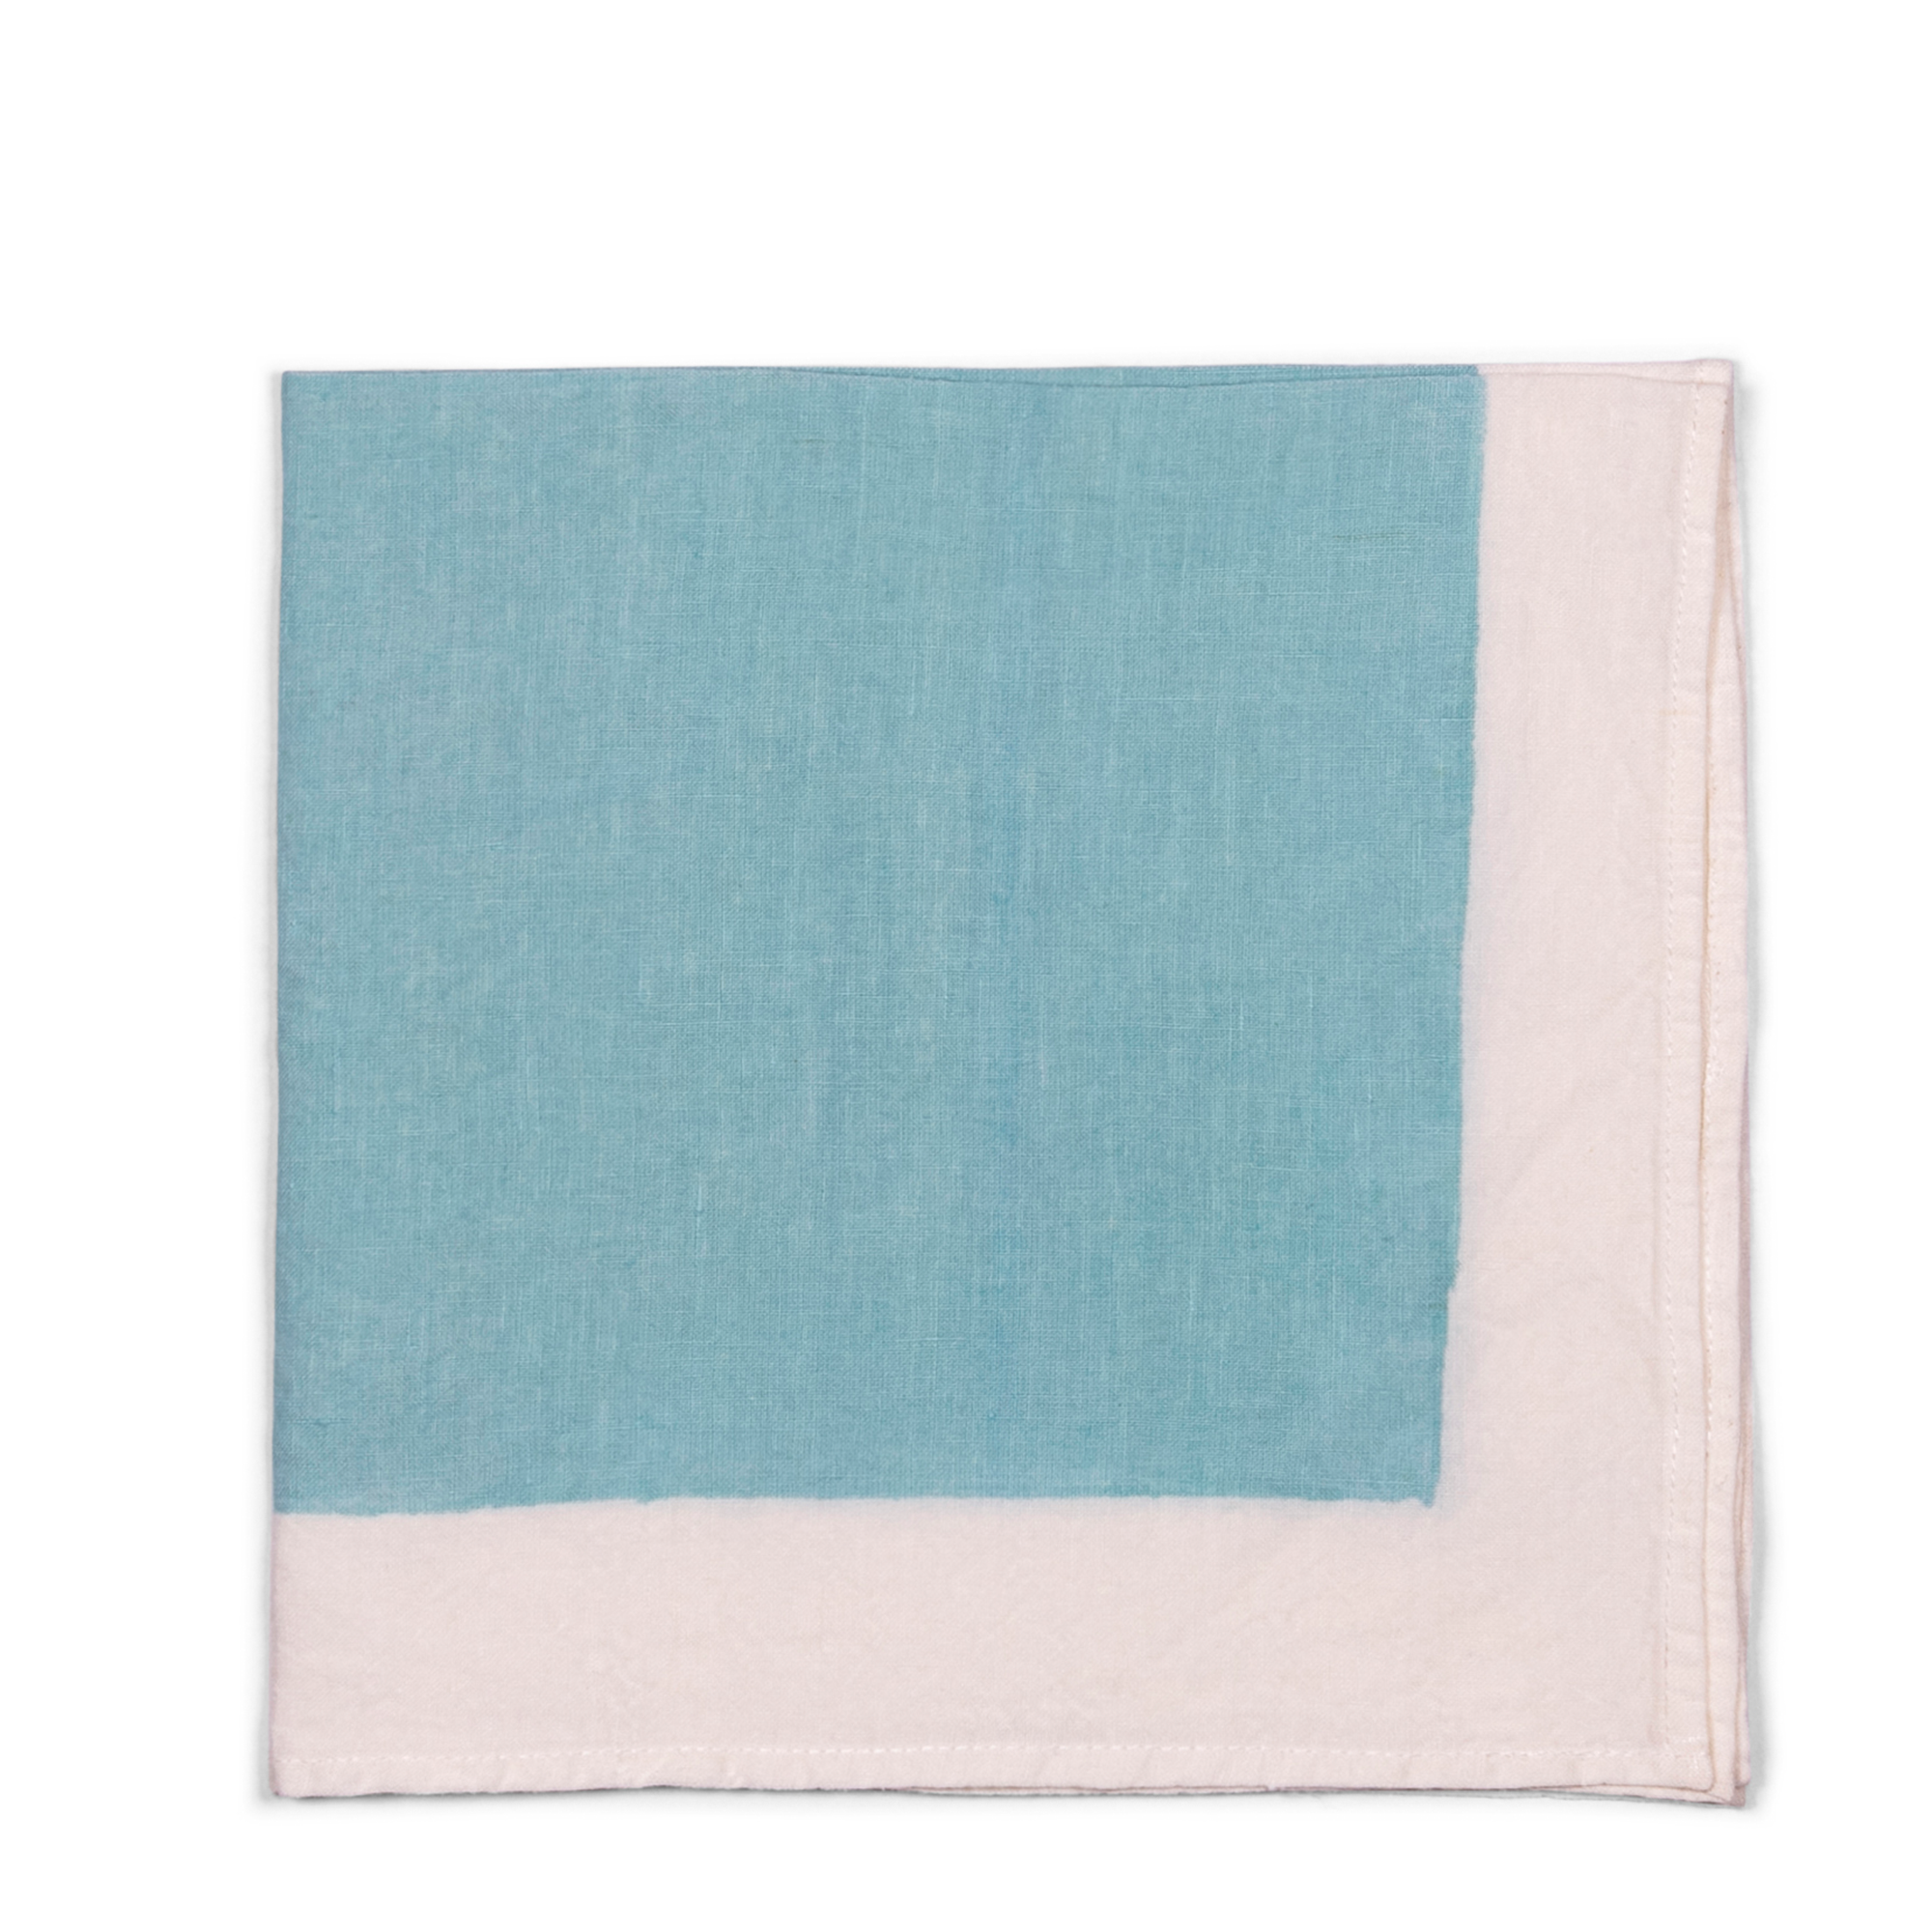 A stylish light blue linen napkin with white borders, handmade using pear wood. Can be used for breakfast, formal dining, or garden tablescape.